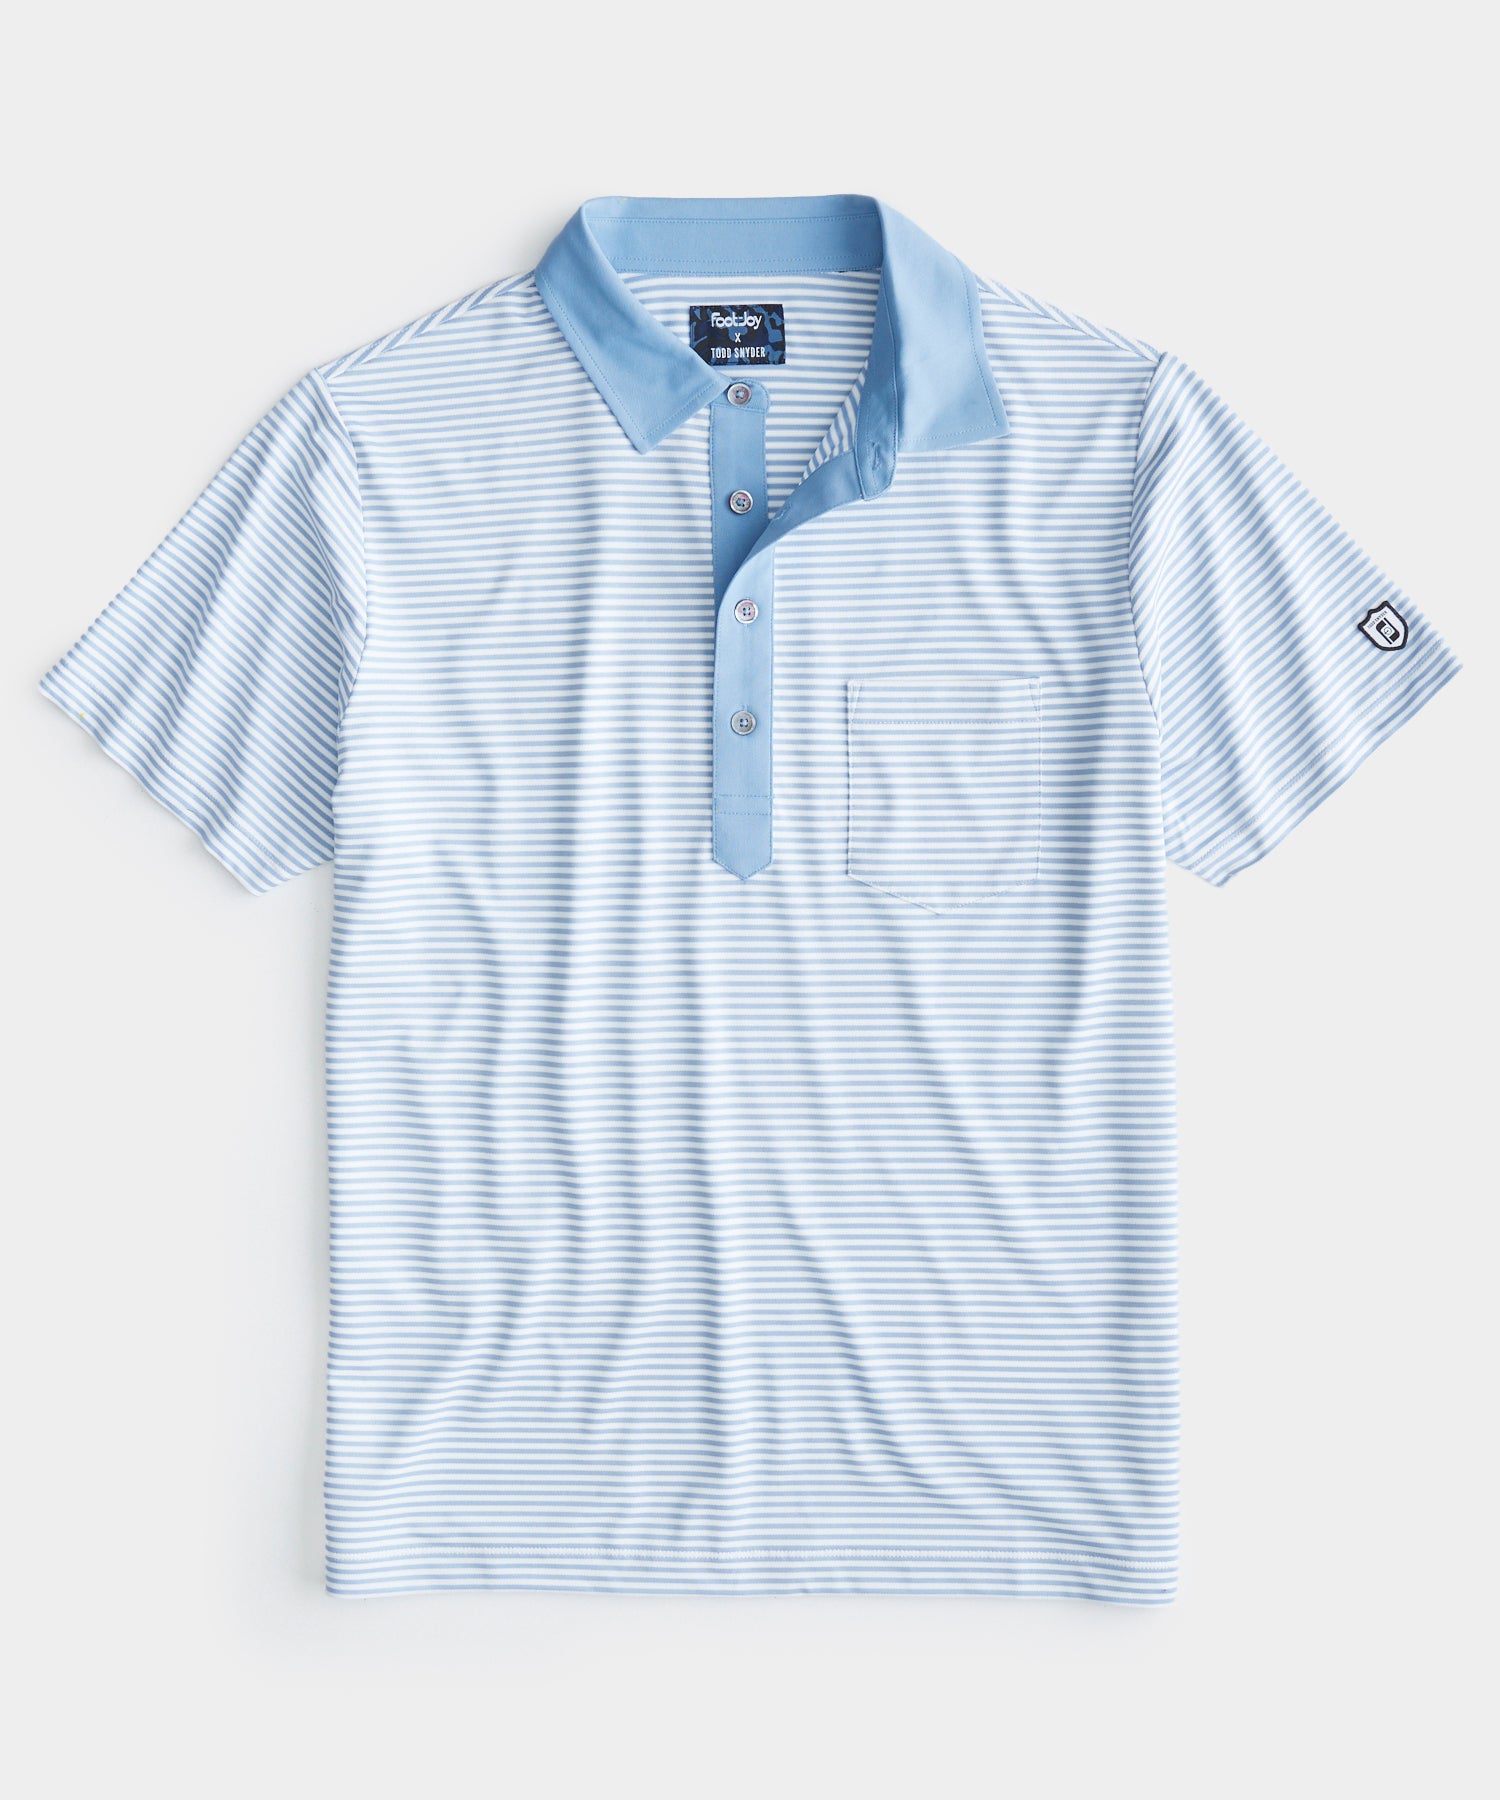 Todd Snyder x FootJoy Fine Stripe Yarn-Dyed Pique Polo In Blue/White